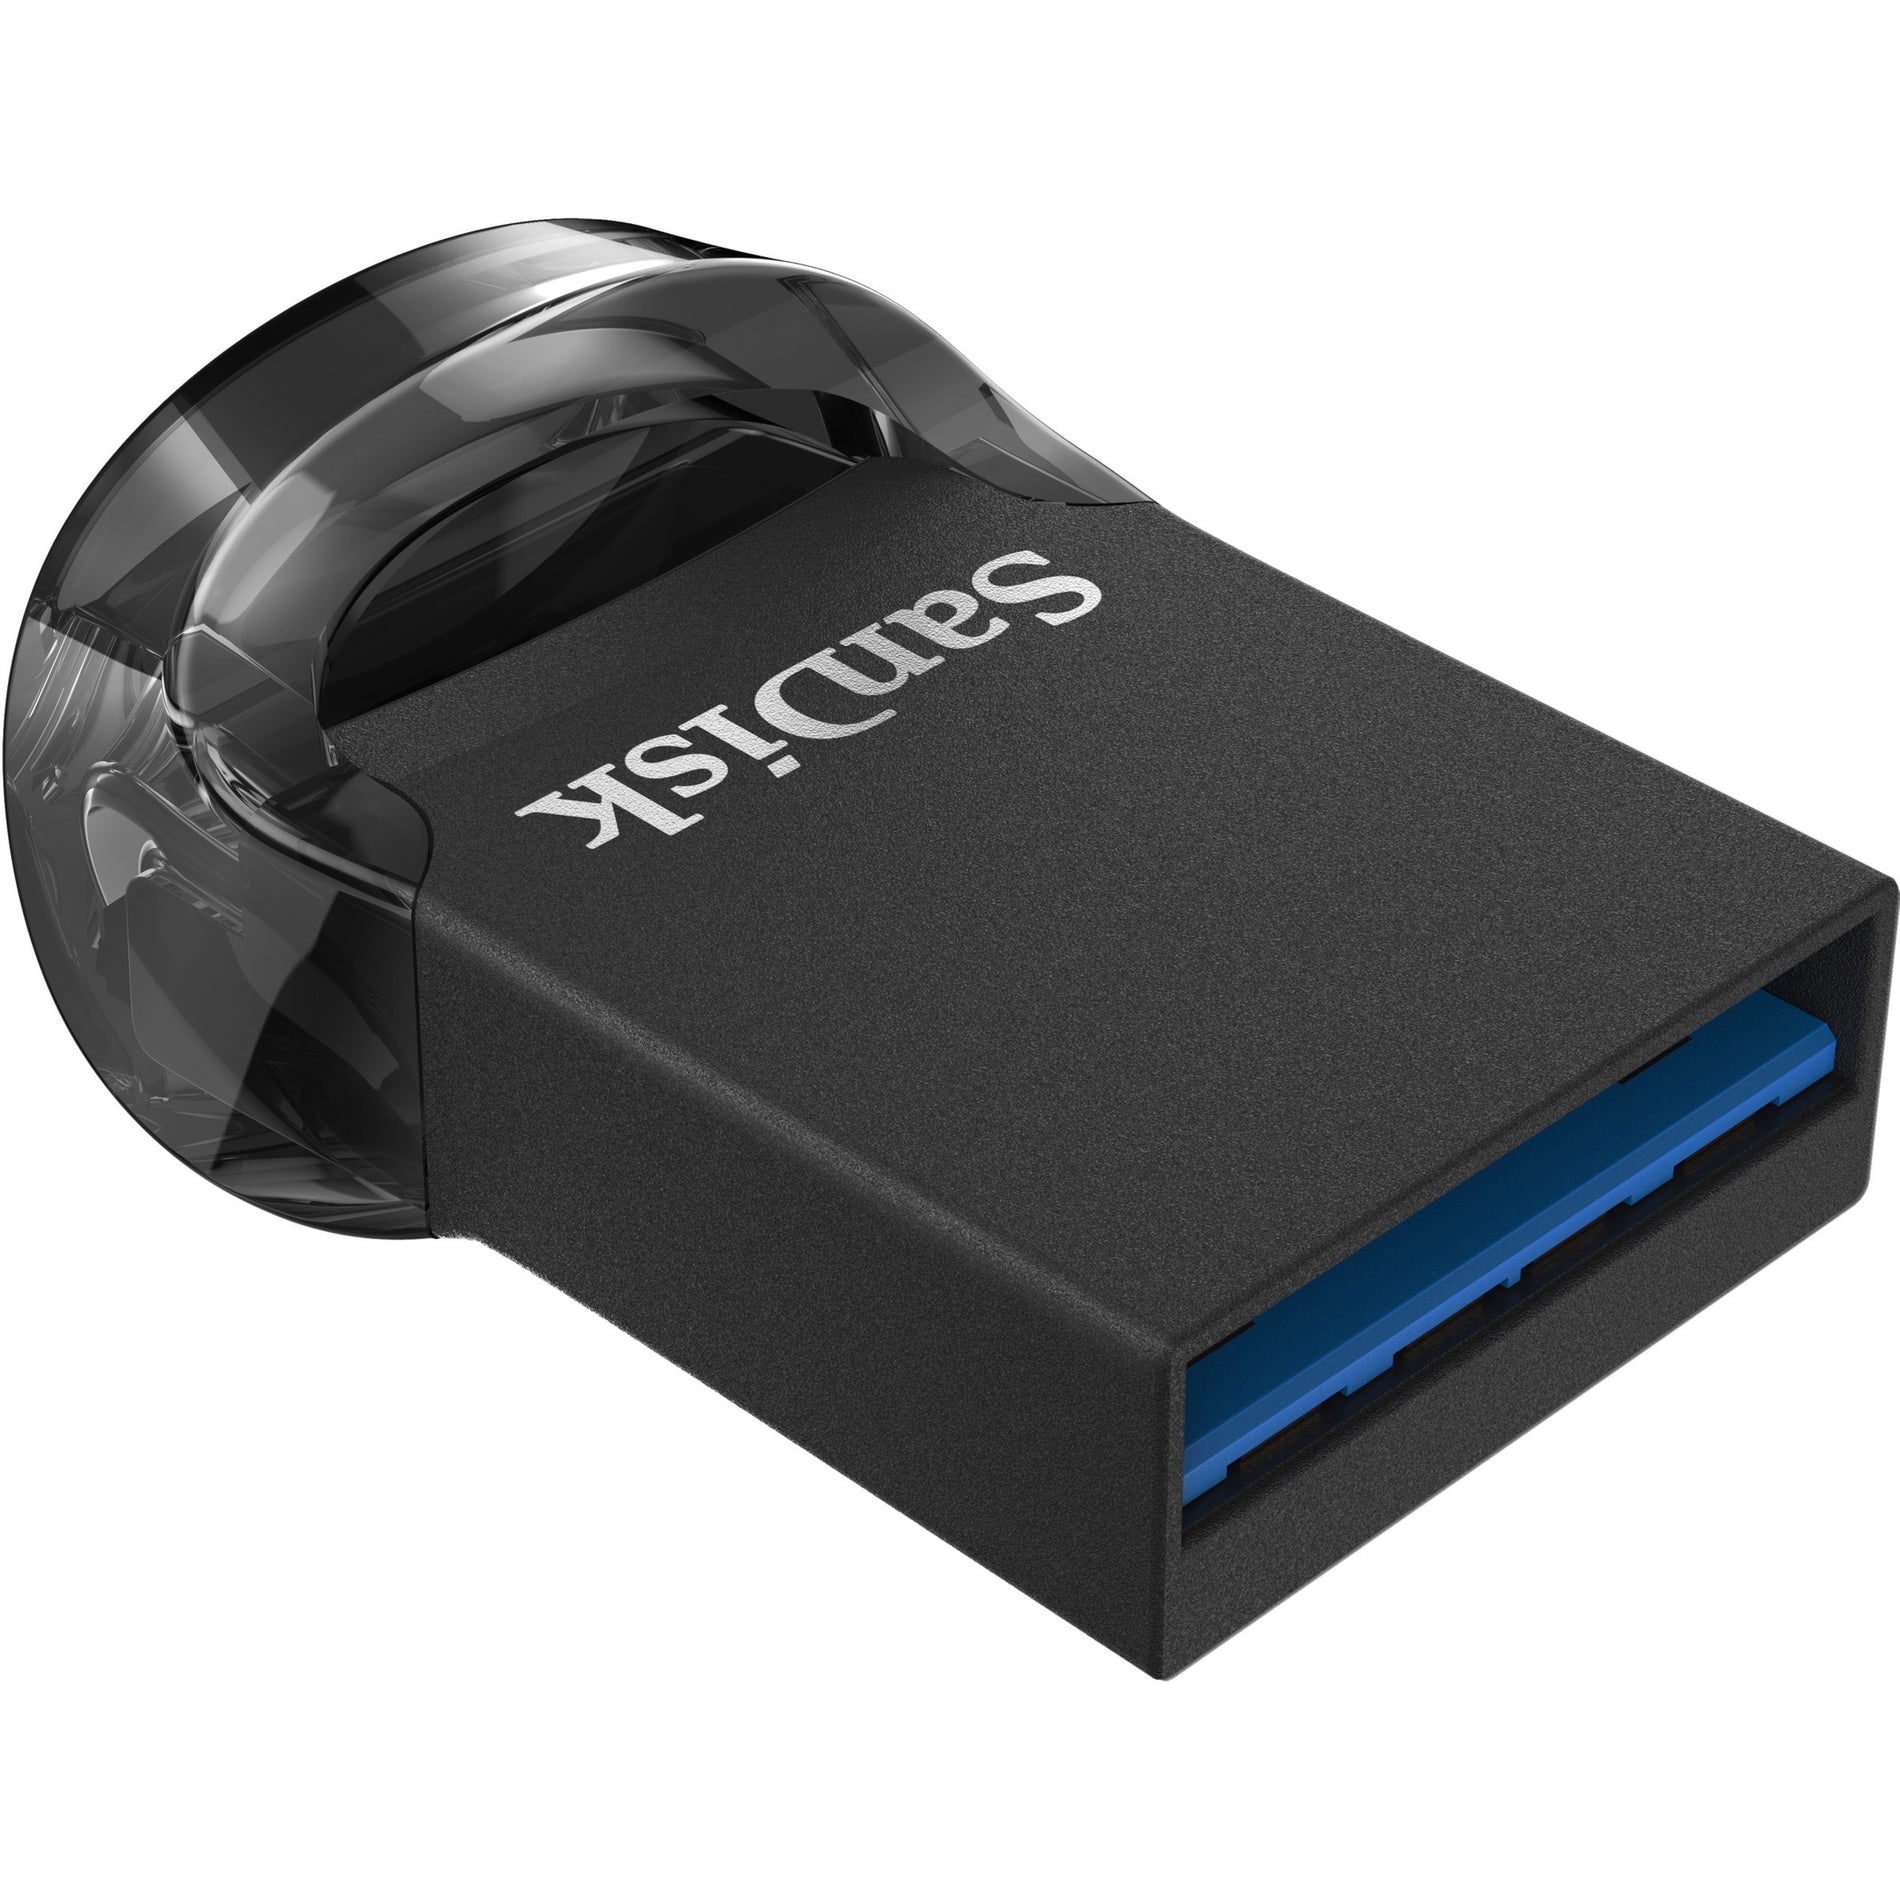 SanDisk SDCZ430-064G-A46 Ultra Fit USB 3.1 Flash Drive 64GB, High-Speed Data Transfer and Compact Design